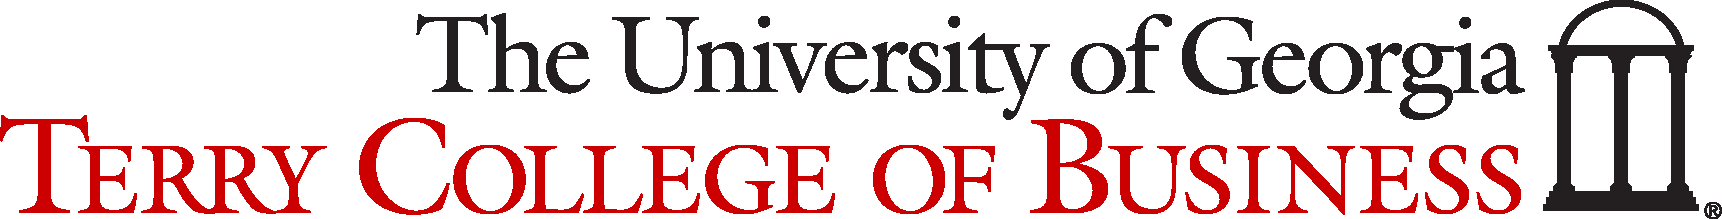 University of Georgia, Terry College of Business, Real Estate Program